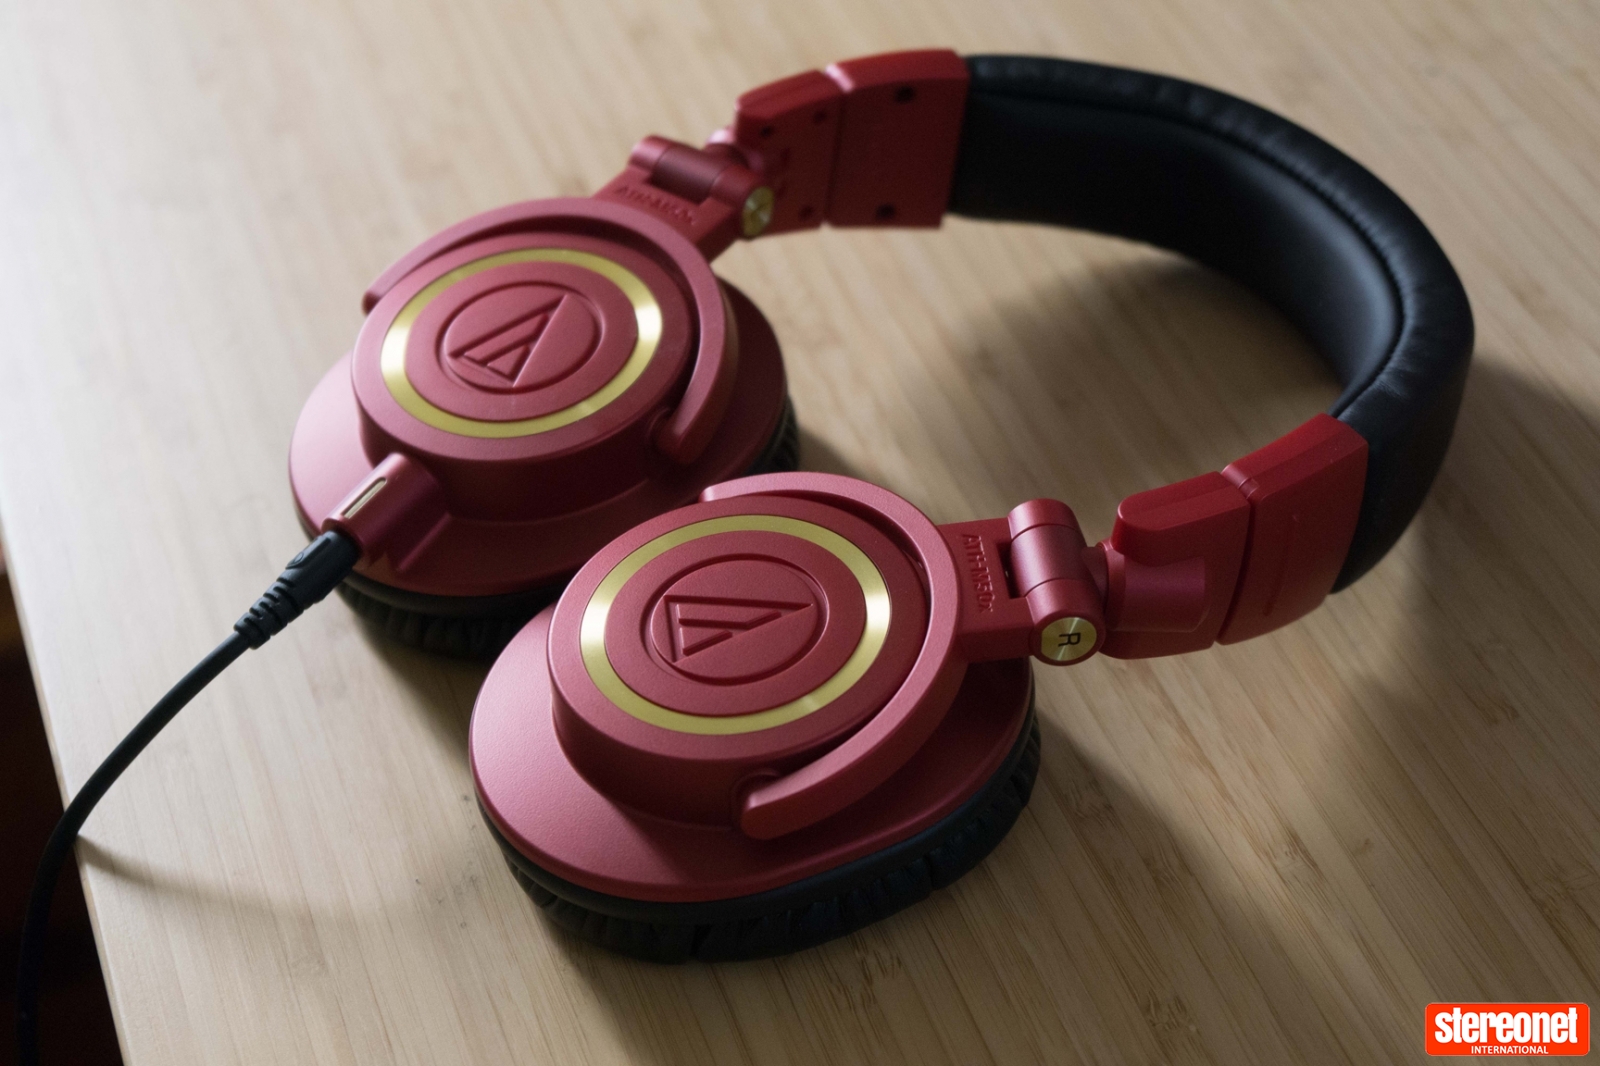 Væsen Mekaniker vision Audio-Technica ATH-M50x Limited Edition Headphones Review | StereoNET  Australia | Hi-Fi news and reviews